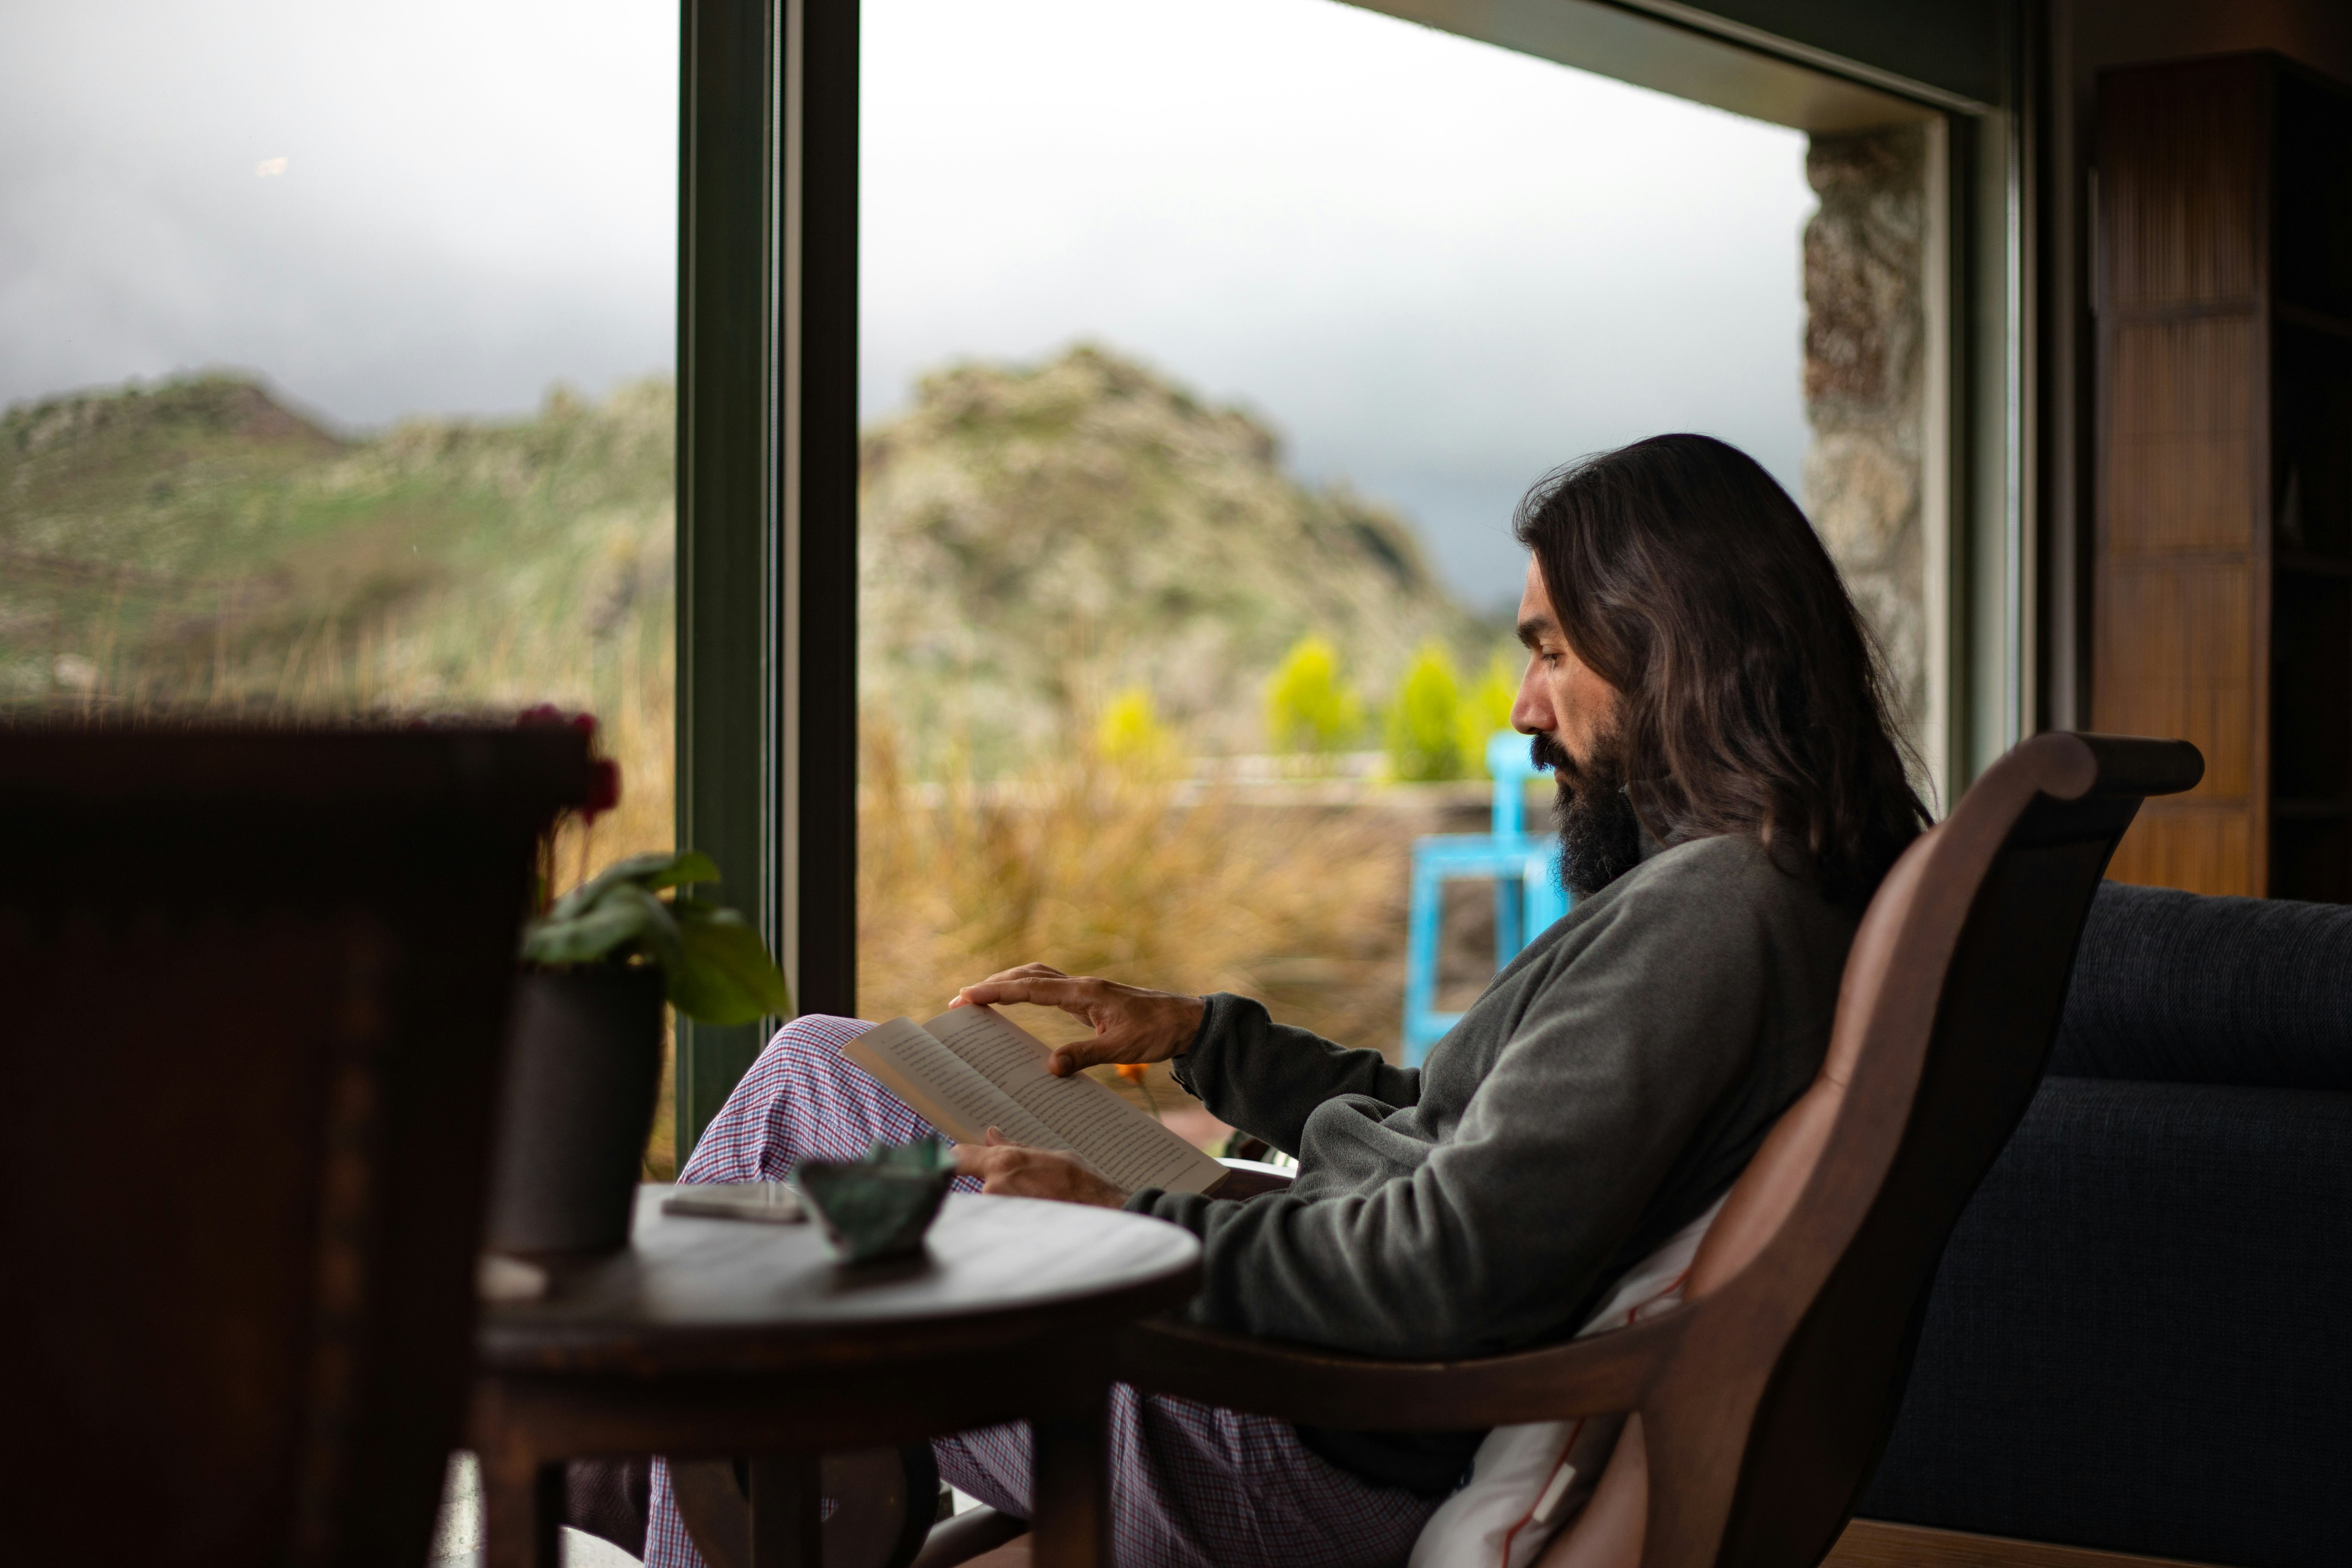 A man with long hair and a beard in a grey fleece pullover and blue and red patterned pajama pants reads a book in a cozy living room with a view of a rocky hill outside the picture window